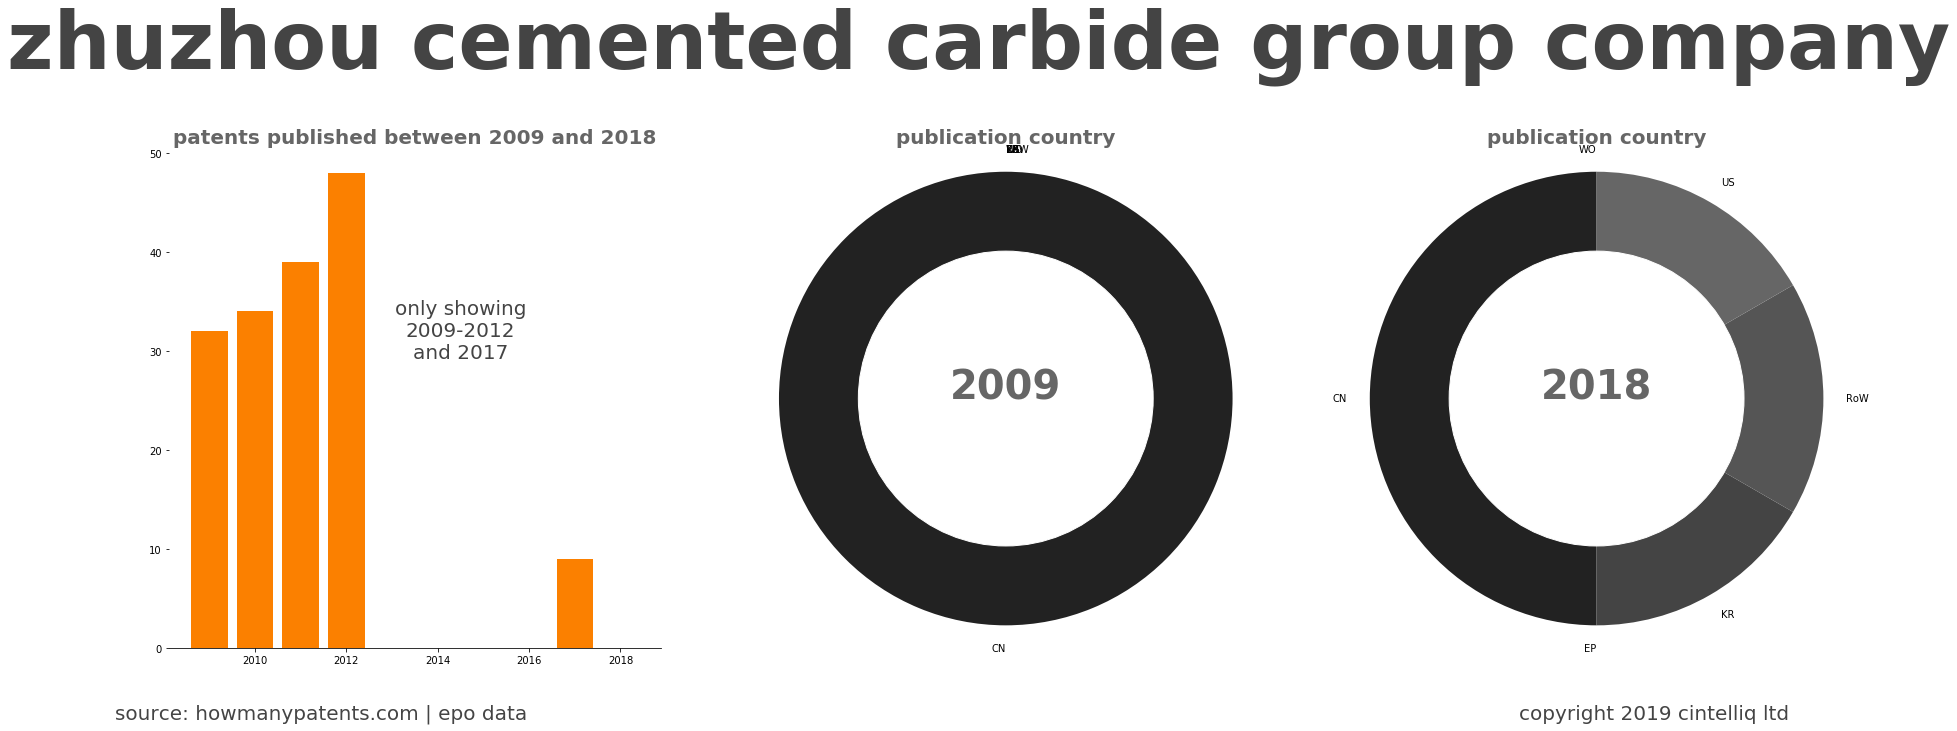 summary of patents for Zhuzhou Cemented Carbide Group Company